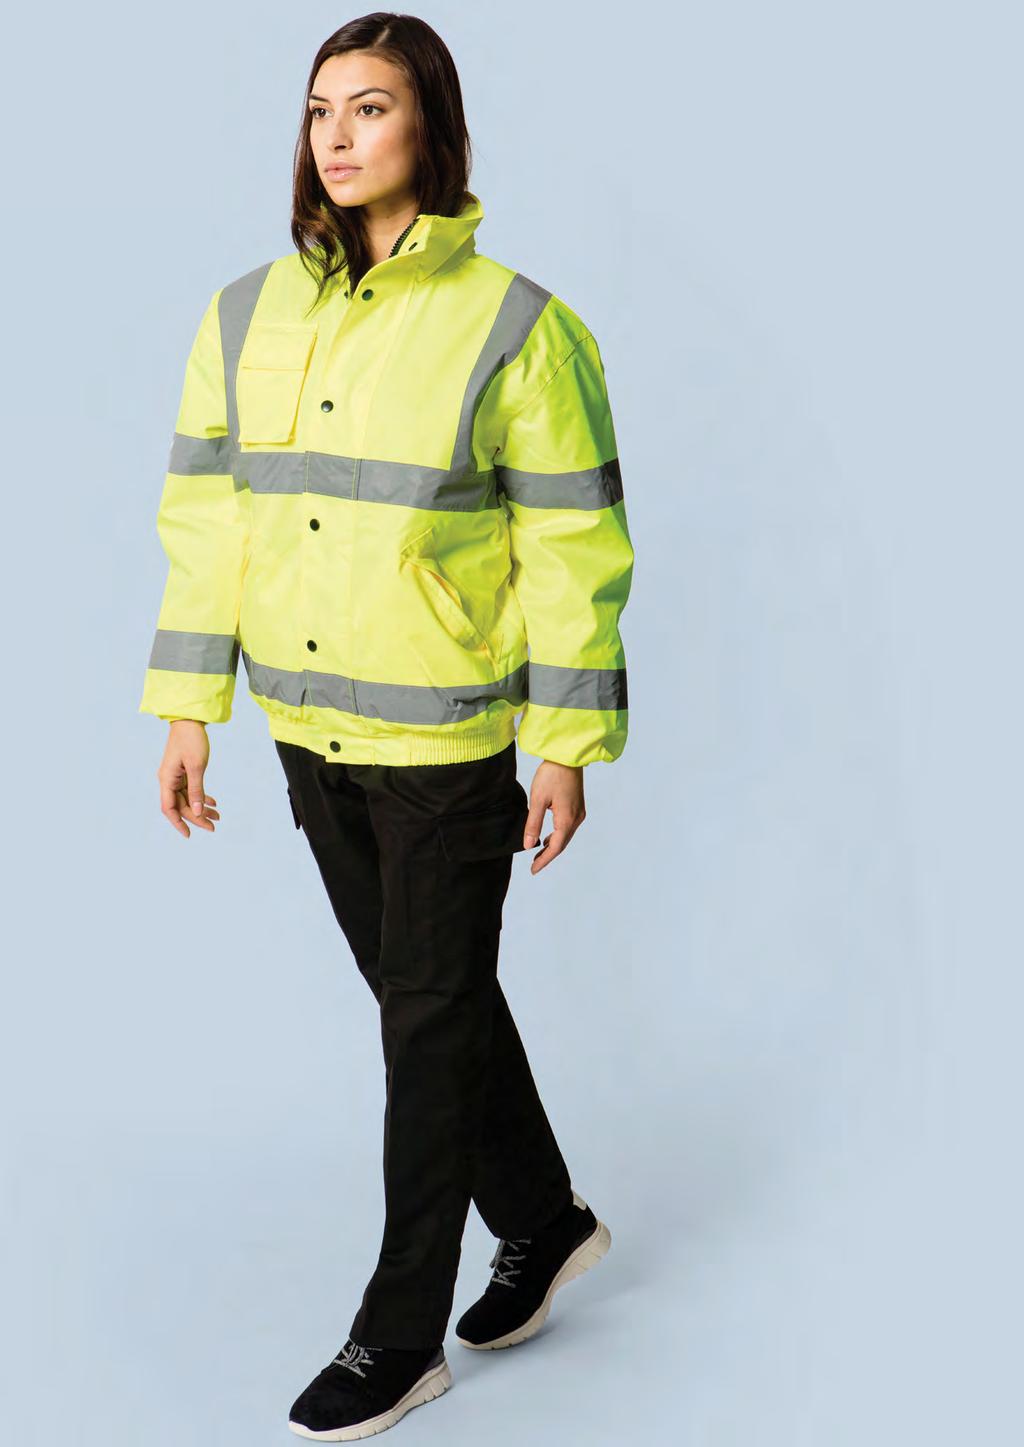 HI-VIS UC804 UNISEX HIGH VISIBILITY BOMBER JACKET 300 DENIER 40 10/1 EN ISO 20471:2013 Class 3 Approved EN 343 Class 3:1 Approved GO/RT 3279 Issue 8 (Orange Only) Conforming to 89/686/ EEC Directive